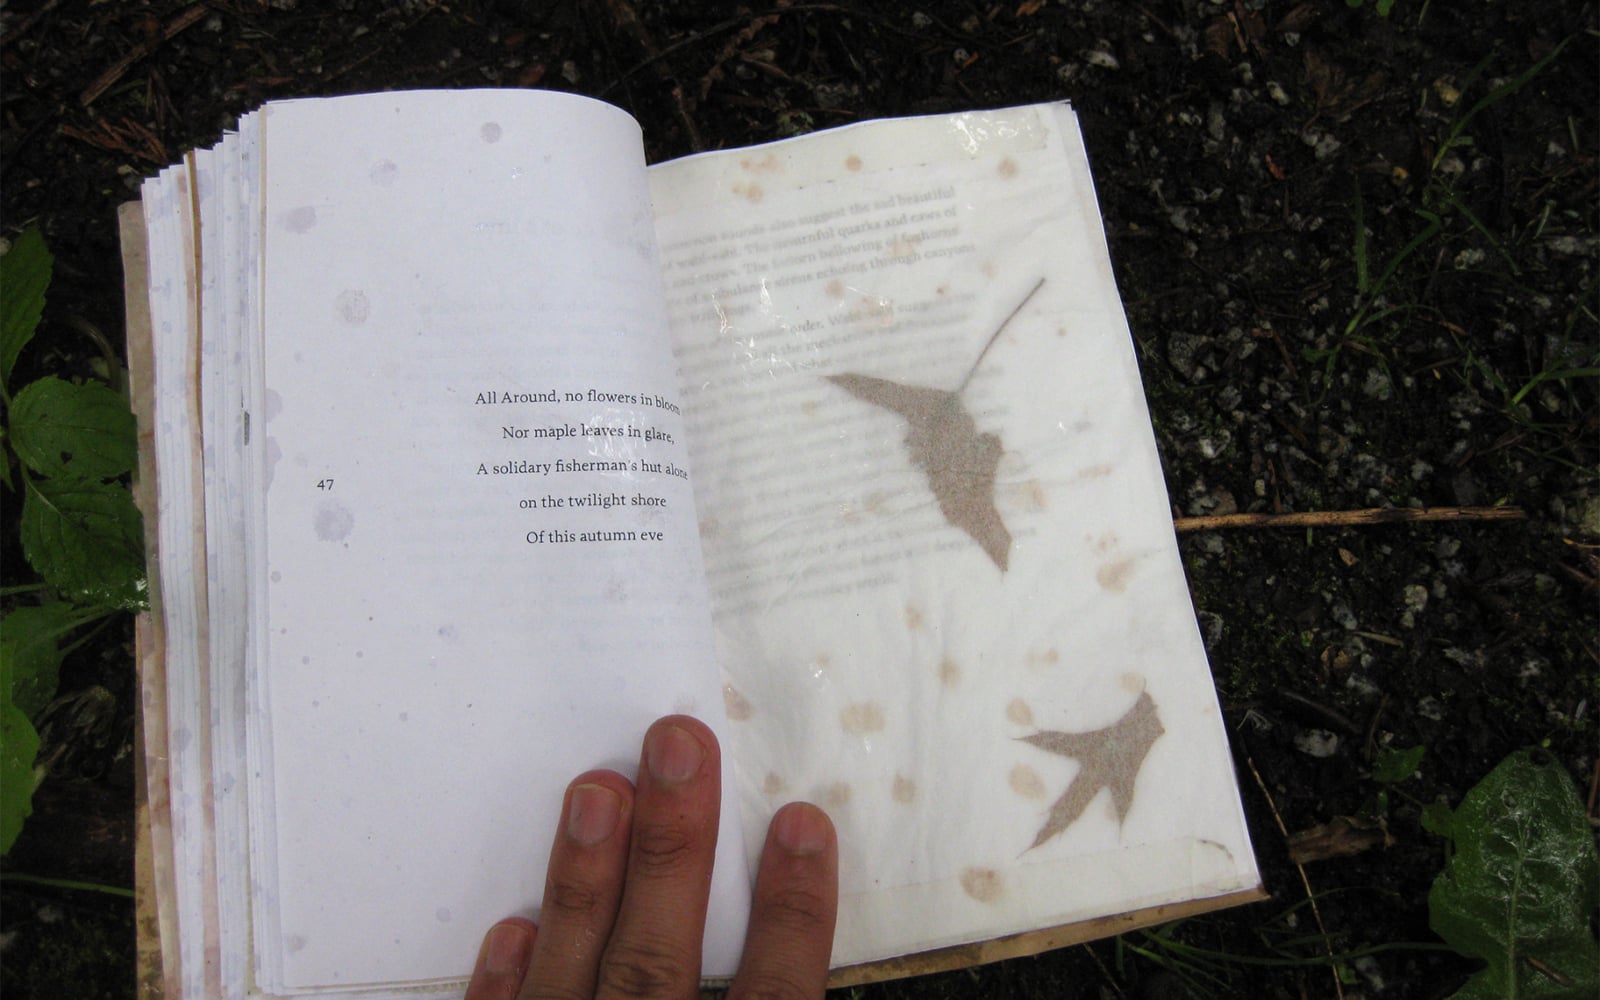 an open book on a wet forest floor. A poem is shown. It reads: All around, no flowers in bloom; nor maple leaves in glare, A solidary fisherman’s hut alone; on the twilight shore; of this autumn eve.